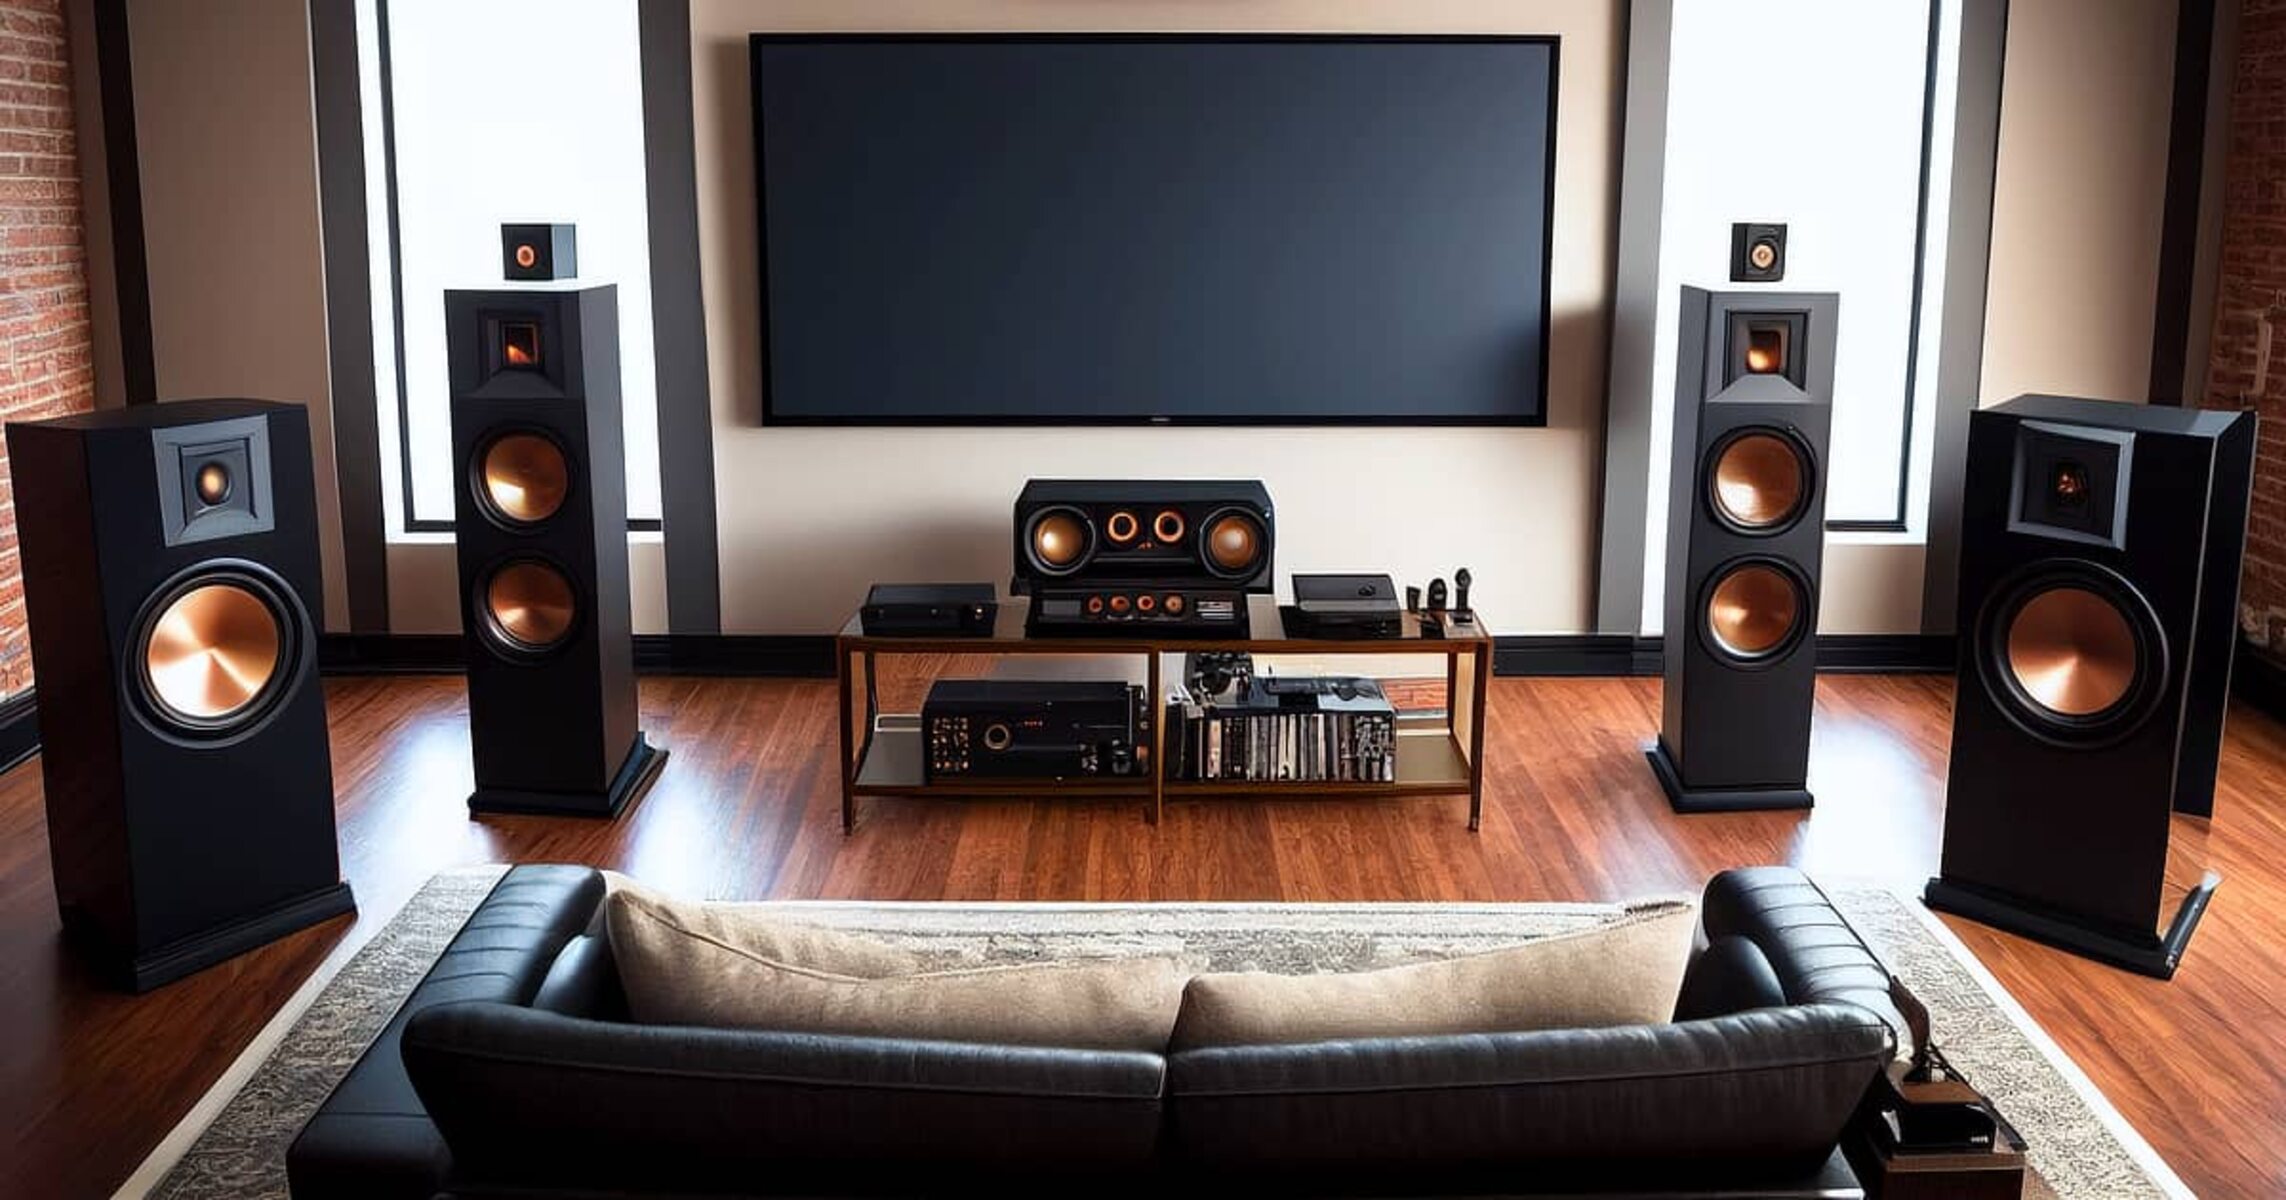 What Video Files Will Play On A Sony Surround Sound System Setup?